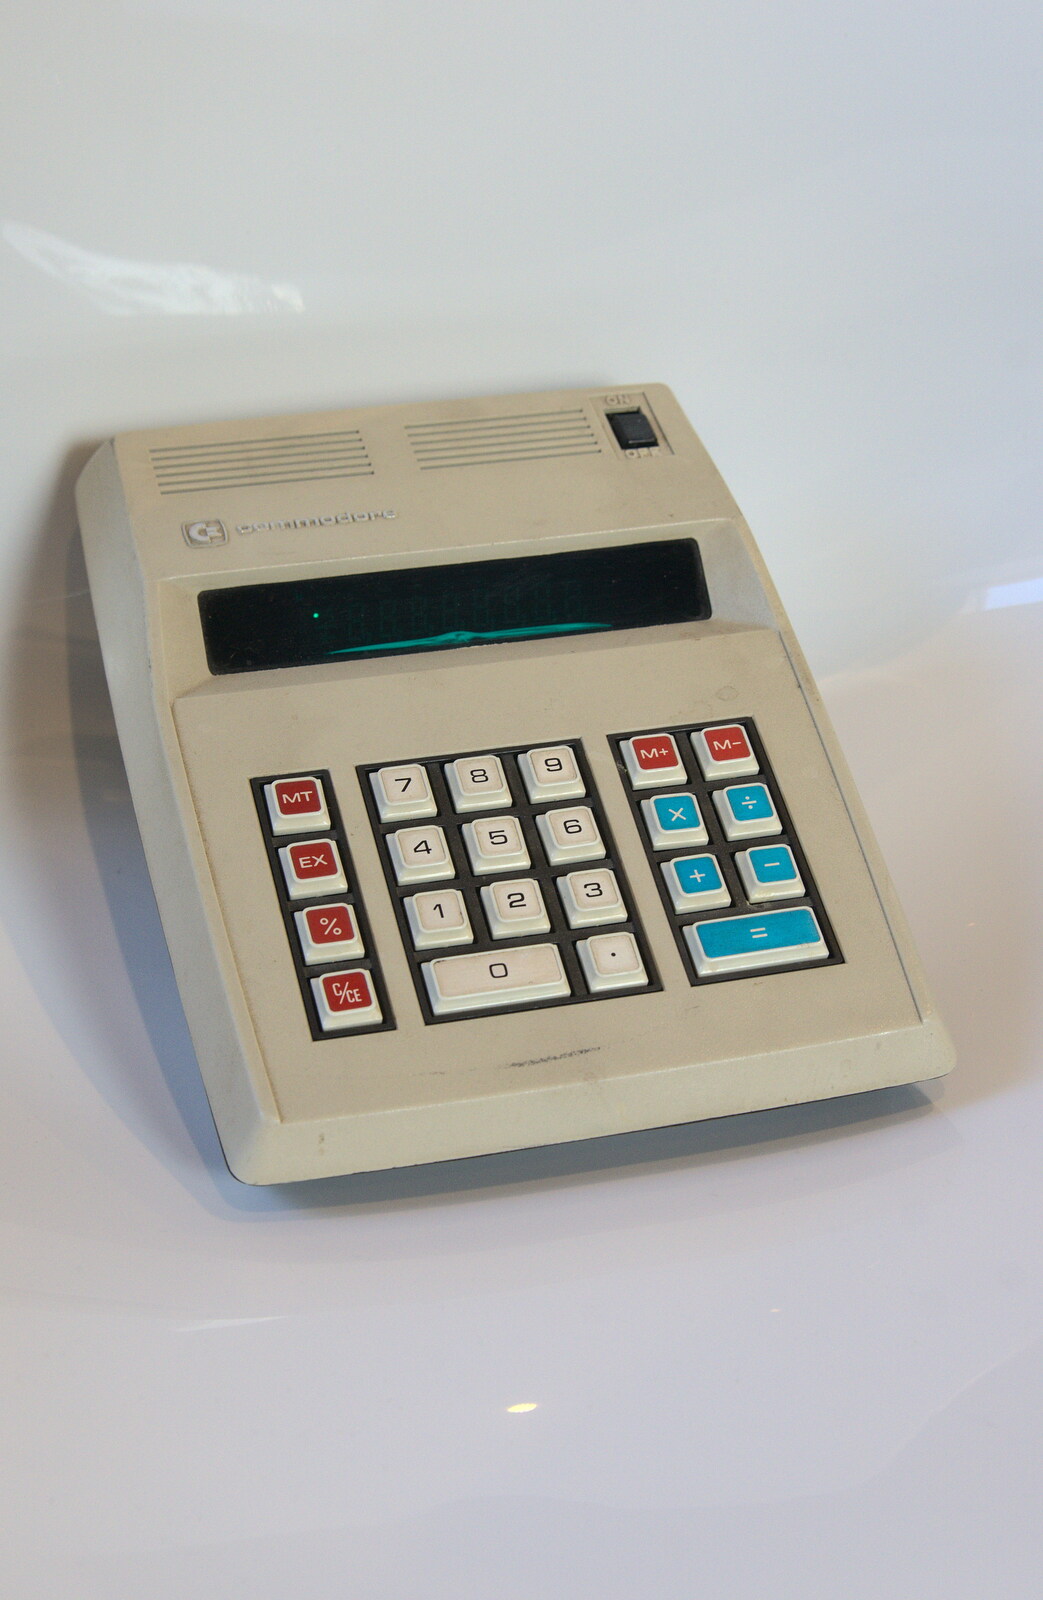 A Commodore calculator from Fred's Shop, Brome, Suffolk - 20th September 2014